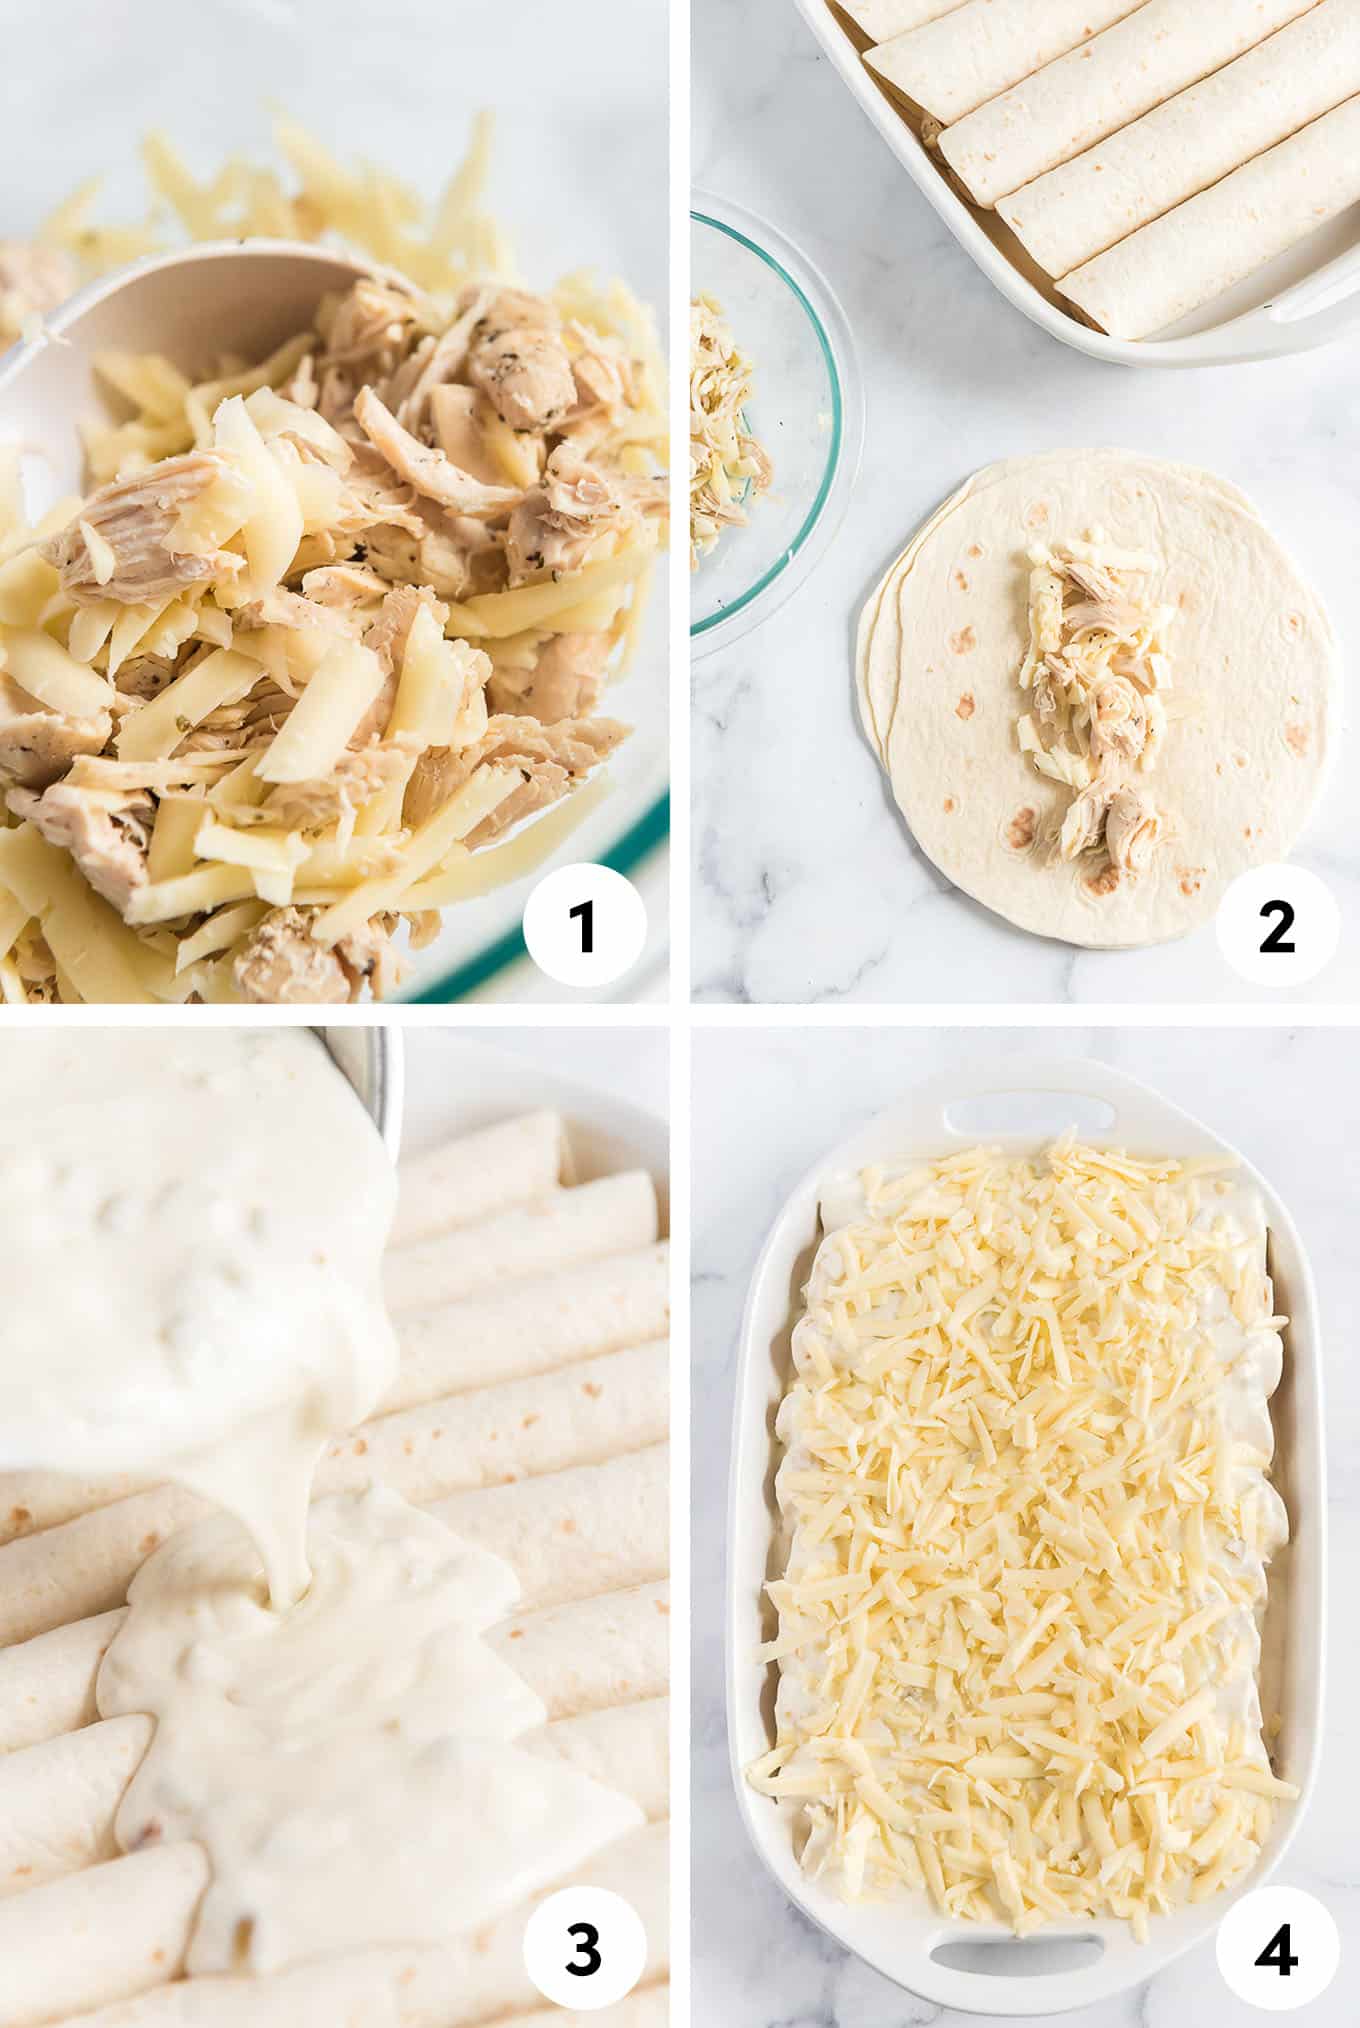 A collage of images showing the steps for assembling the enchiladas from mix the cheese and chicken, adding to flour tortillas and topping with the sauce and cheese.